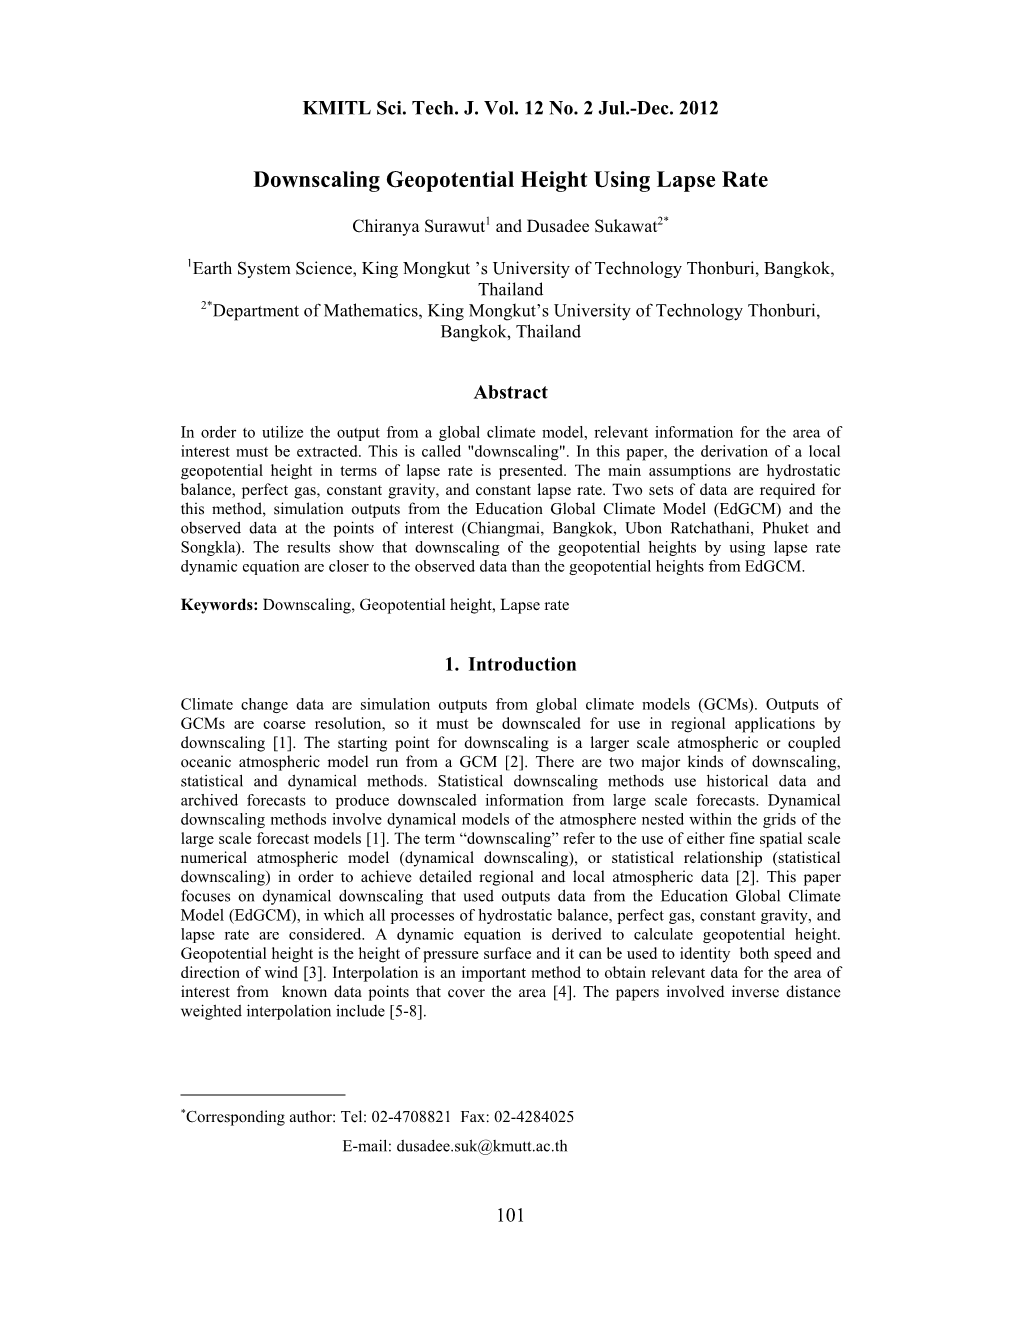 Downscaling Geopotential Height Using Lapse Rate